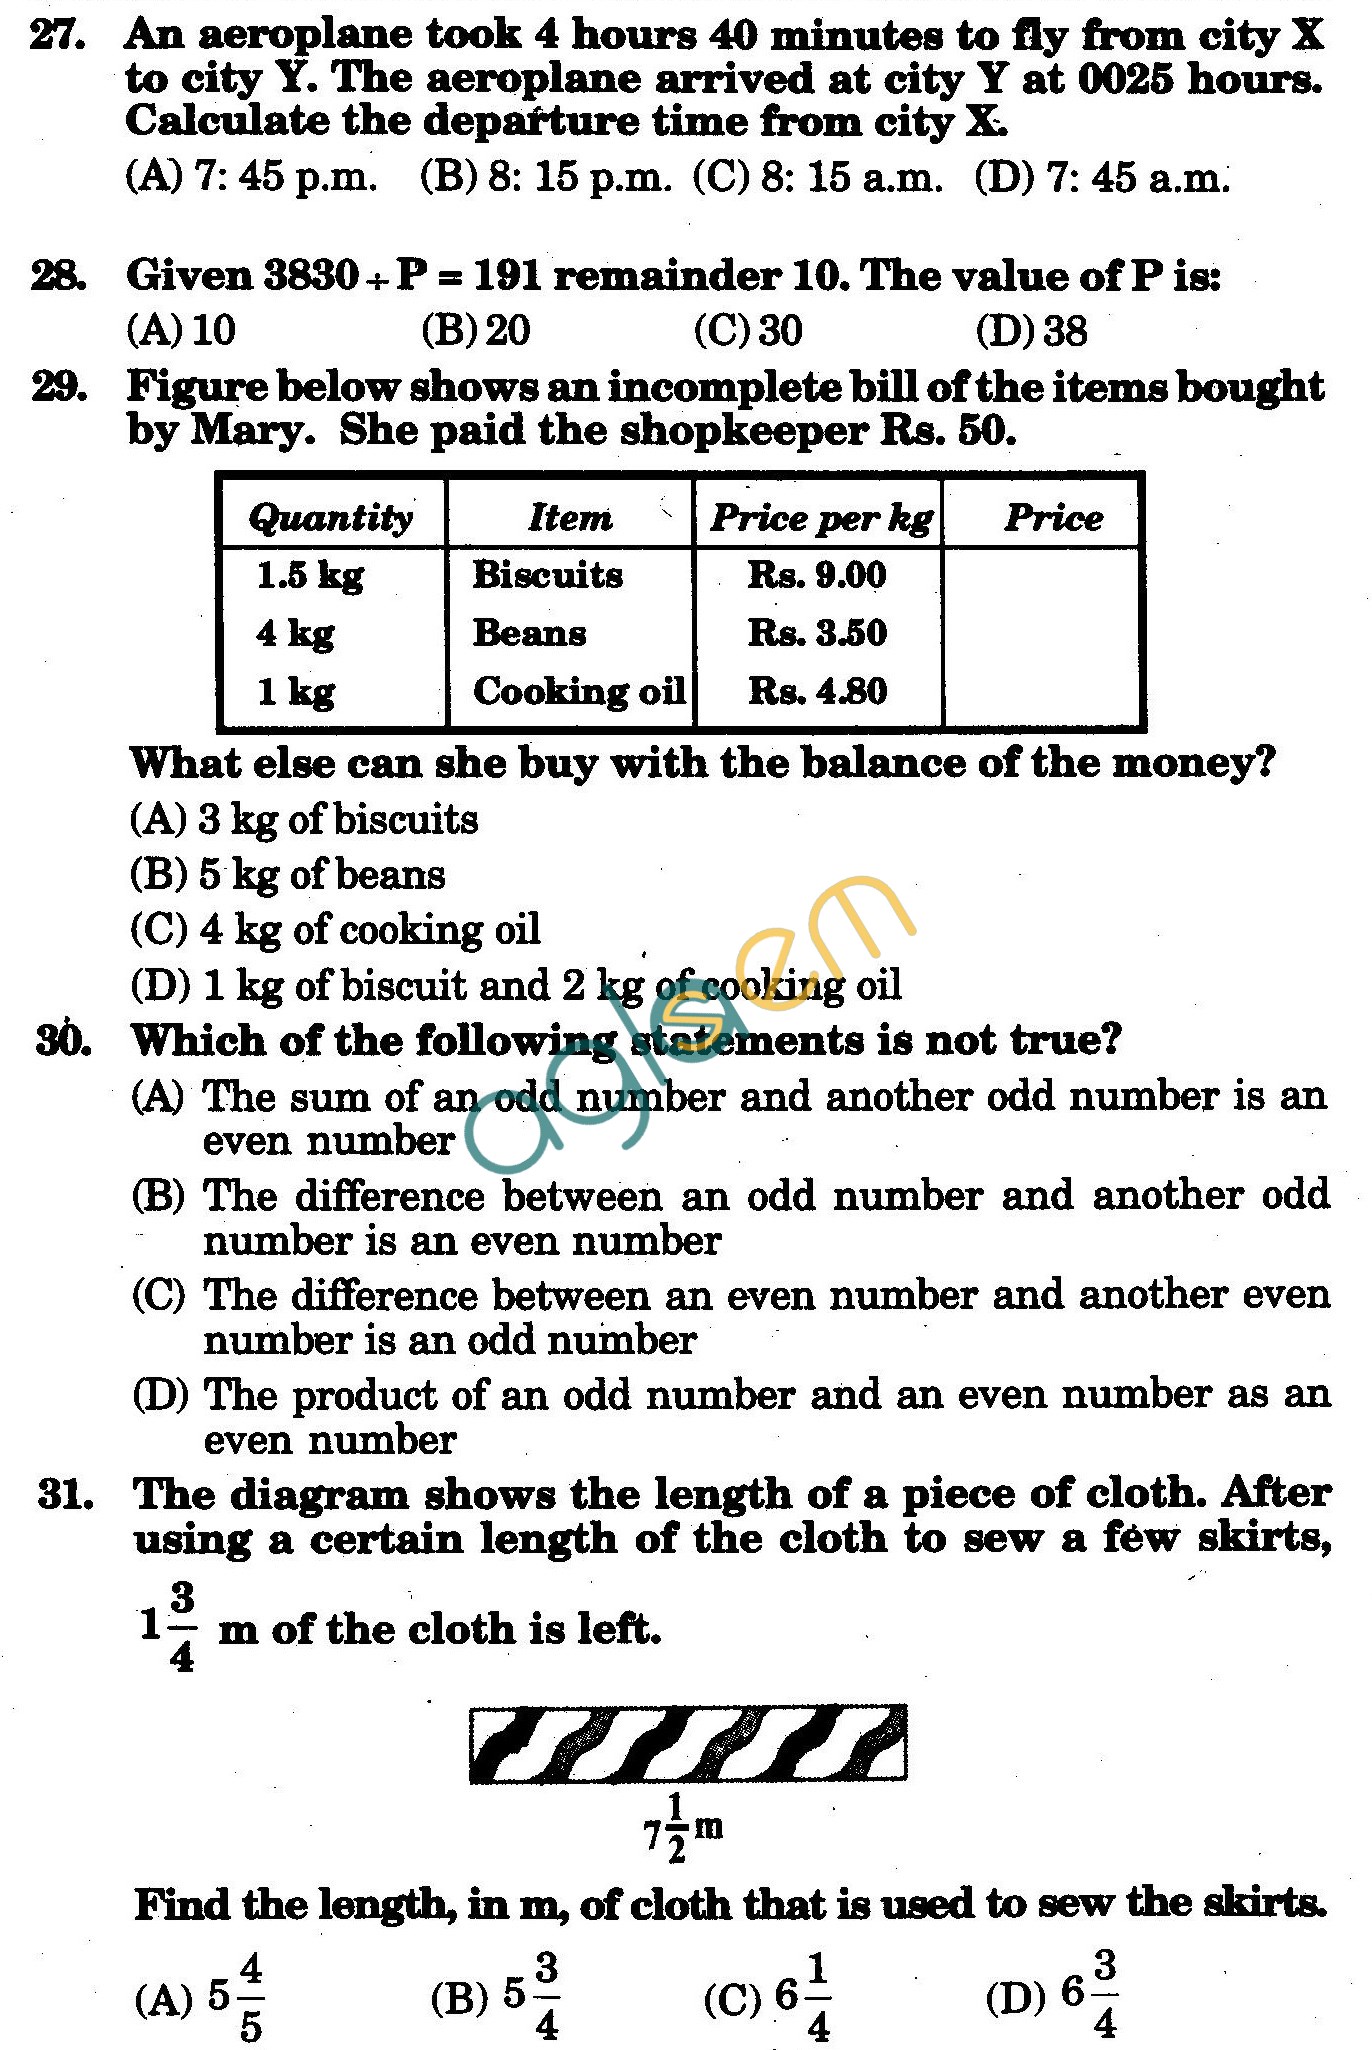 NSTSE 2010 Class V Question Paper with Answers - Mathematics